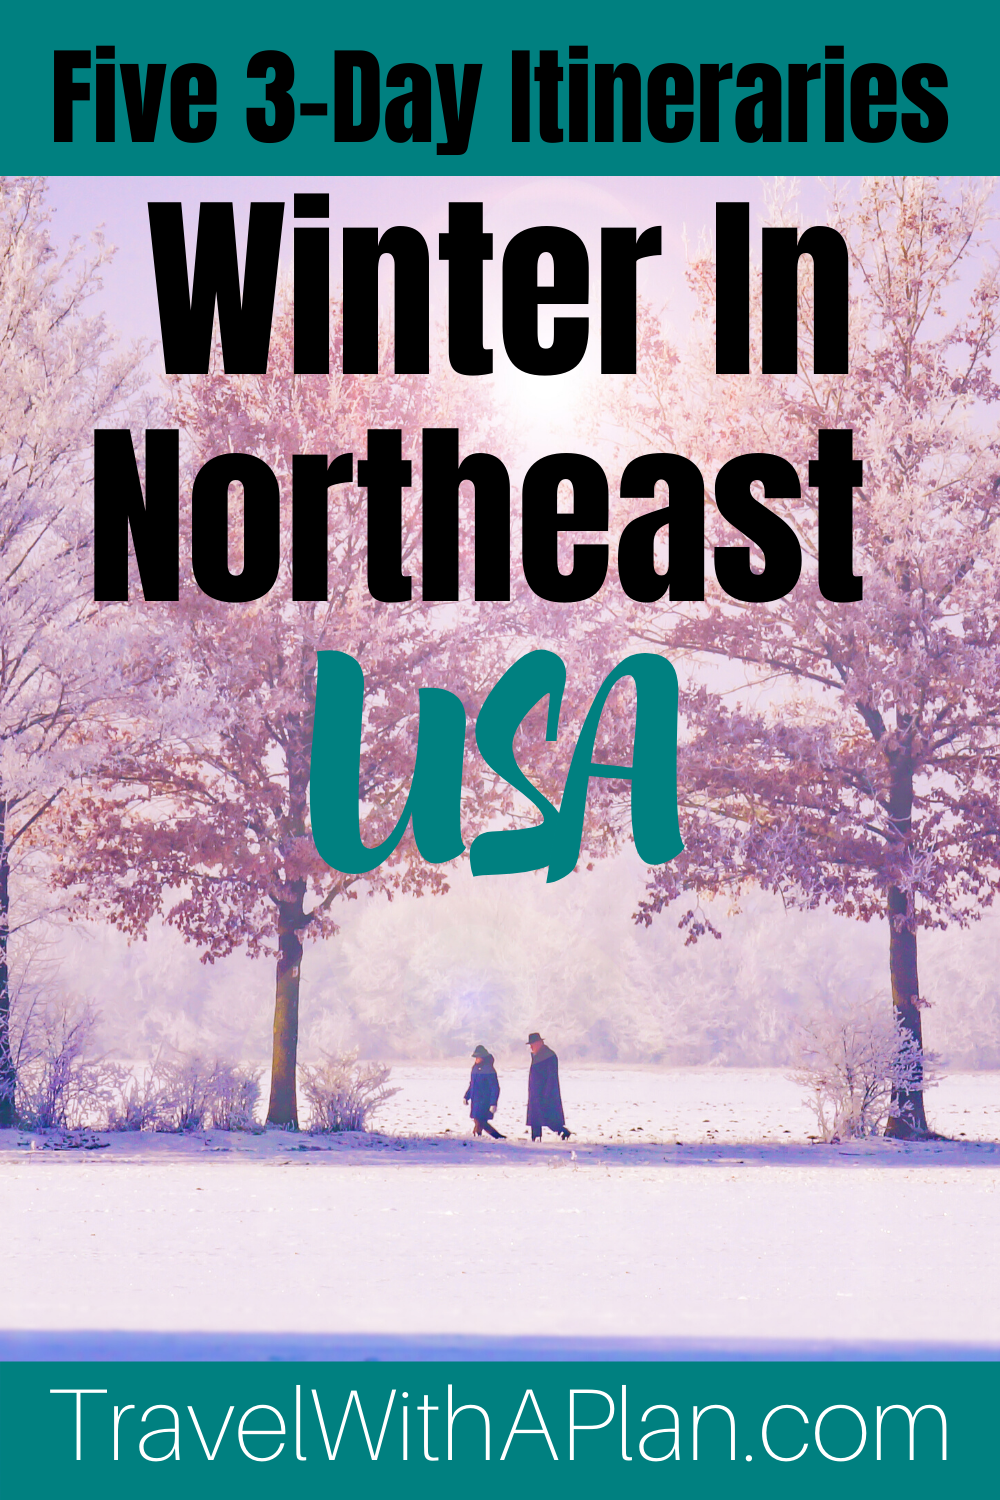 Click here for 5 awesome itineraries for Northeast Winter Weekend Getaways from Top U.S. family travel blog, Travel With A Plan!  #Northeastwintergetaways #bestnortheastwintergetaways #bestnortheastweekendgetaways #bestplacestogointhenortheast #bestwintervacationswithsnow #familywinterweekendgetawayseastcoast #northeasttravel